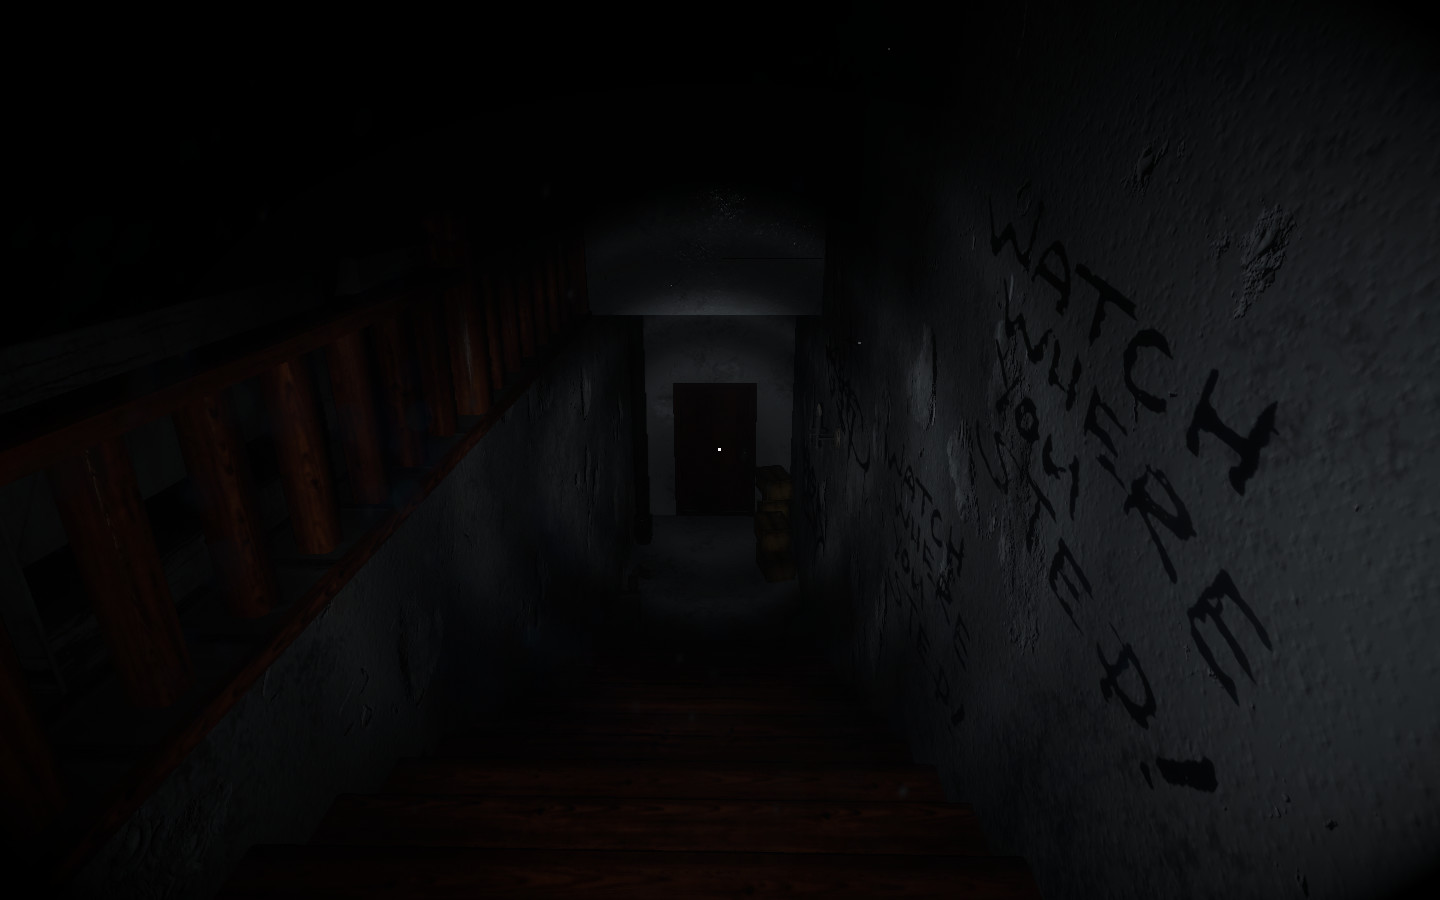 Nyctophobia: Devil Unleashed Free Download